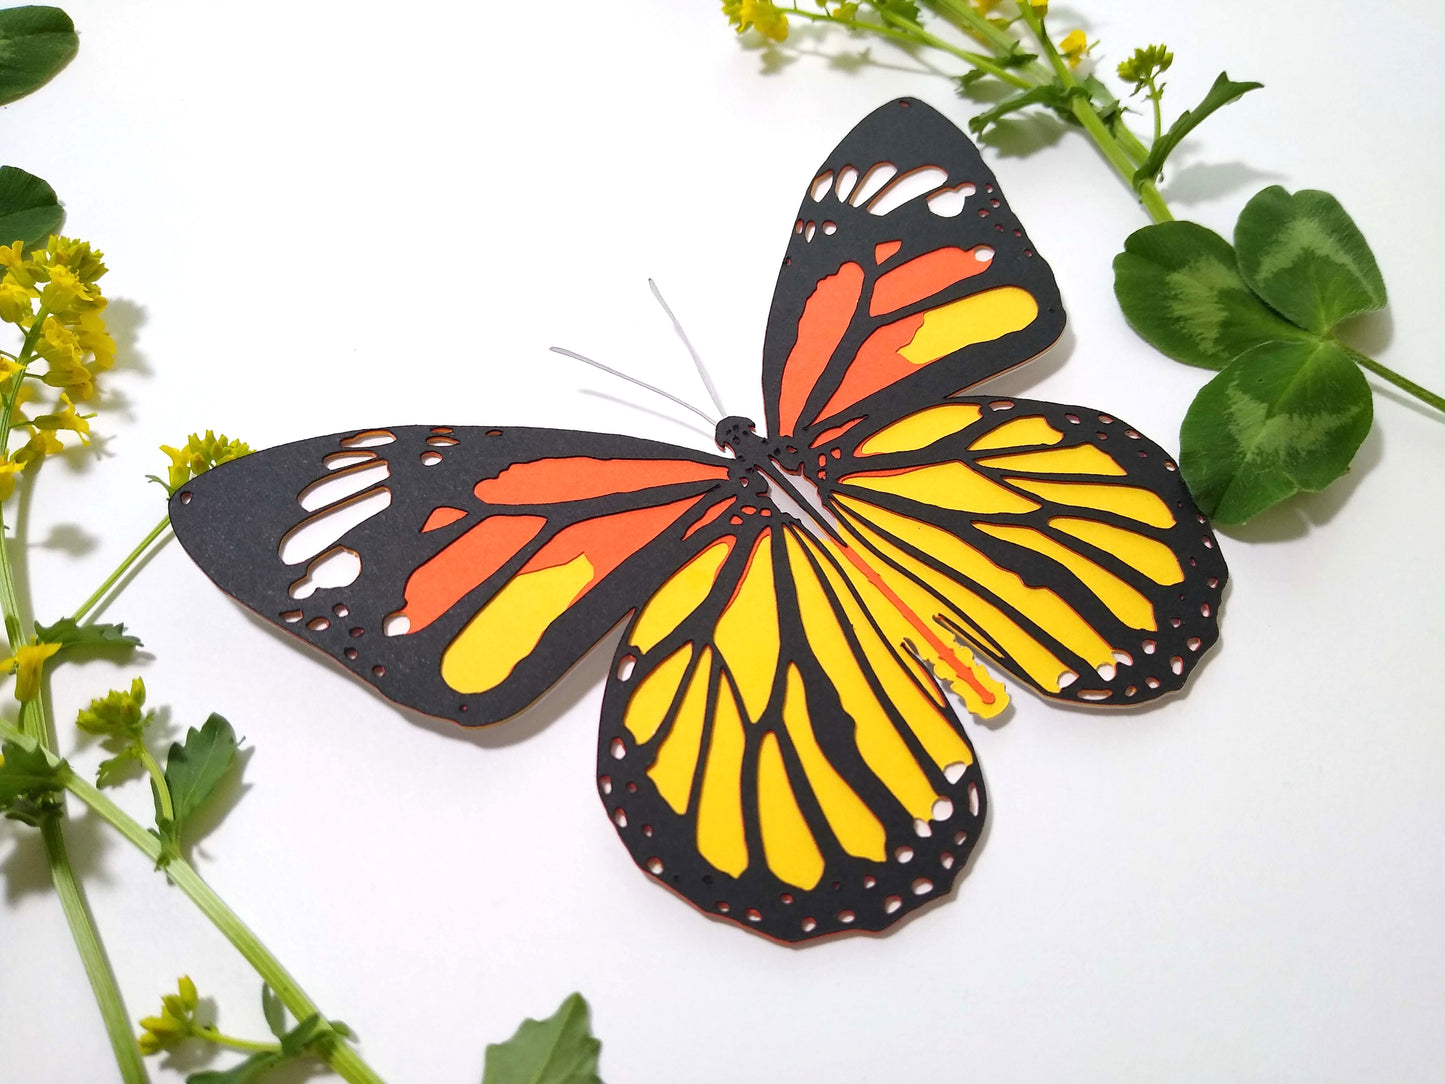 Multi-layered paper butterfly, in the design of a Common Tiger butterfly. It rests next to several sprigs of leaves and small yellow flowers.